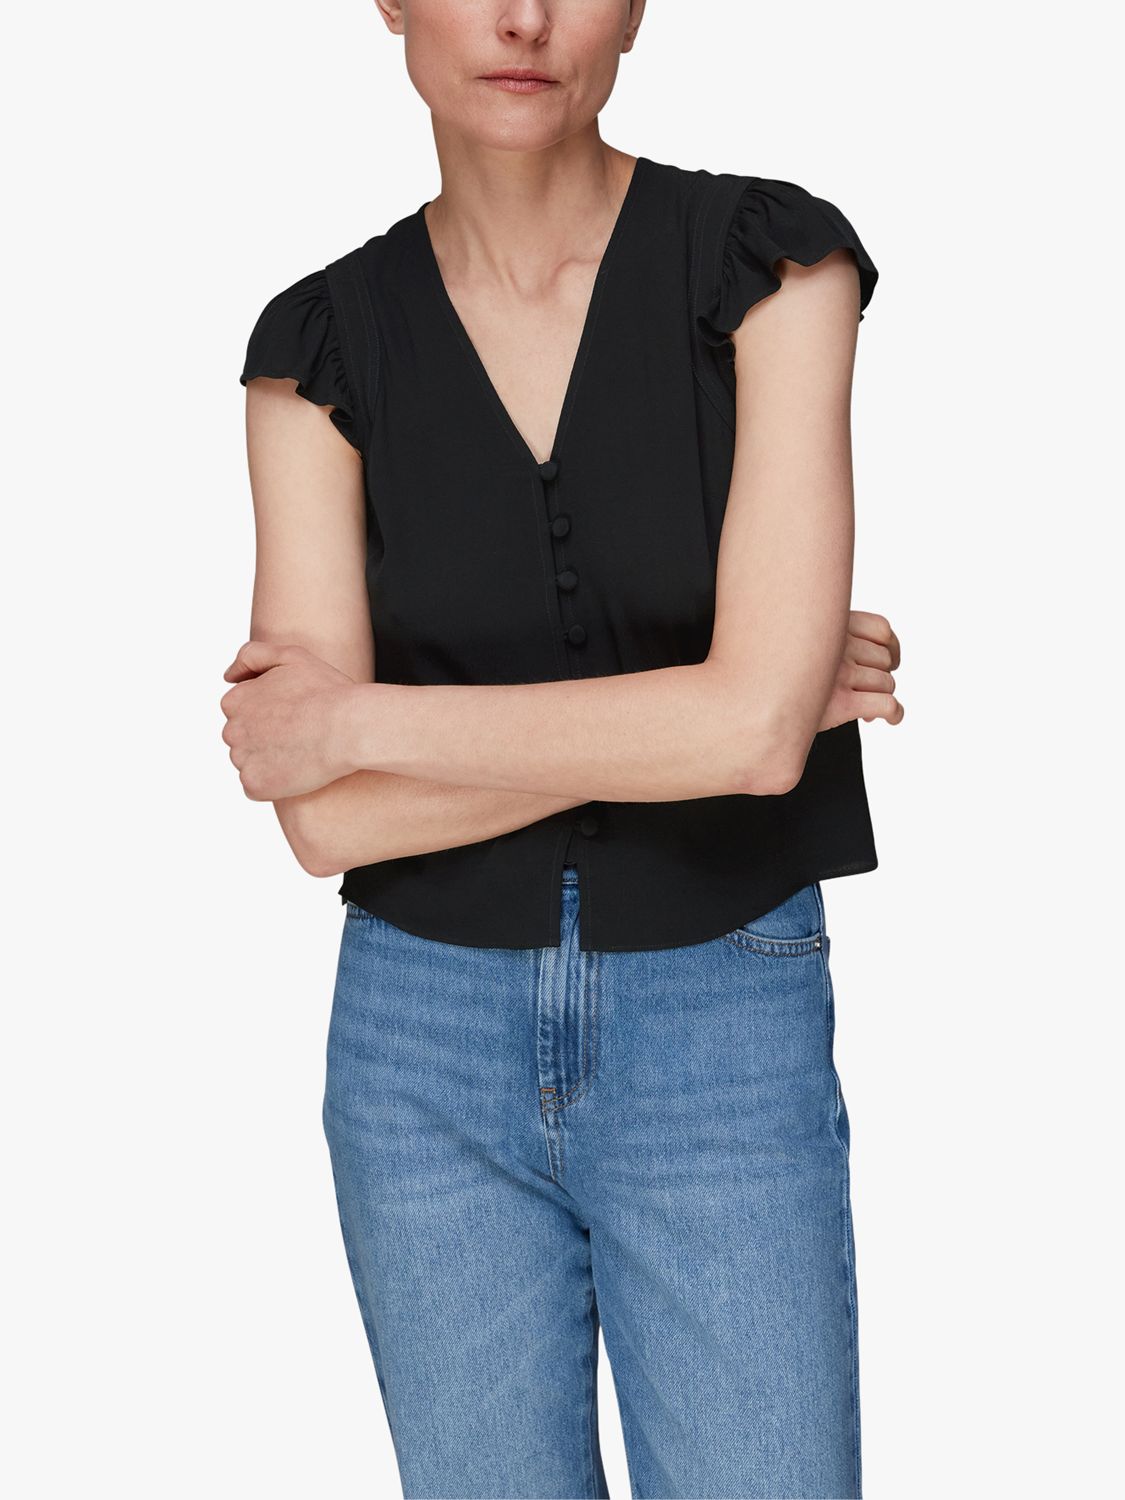 Buy Whistles Frill Sleeve Top Online at johnlewis.com